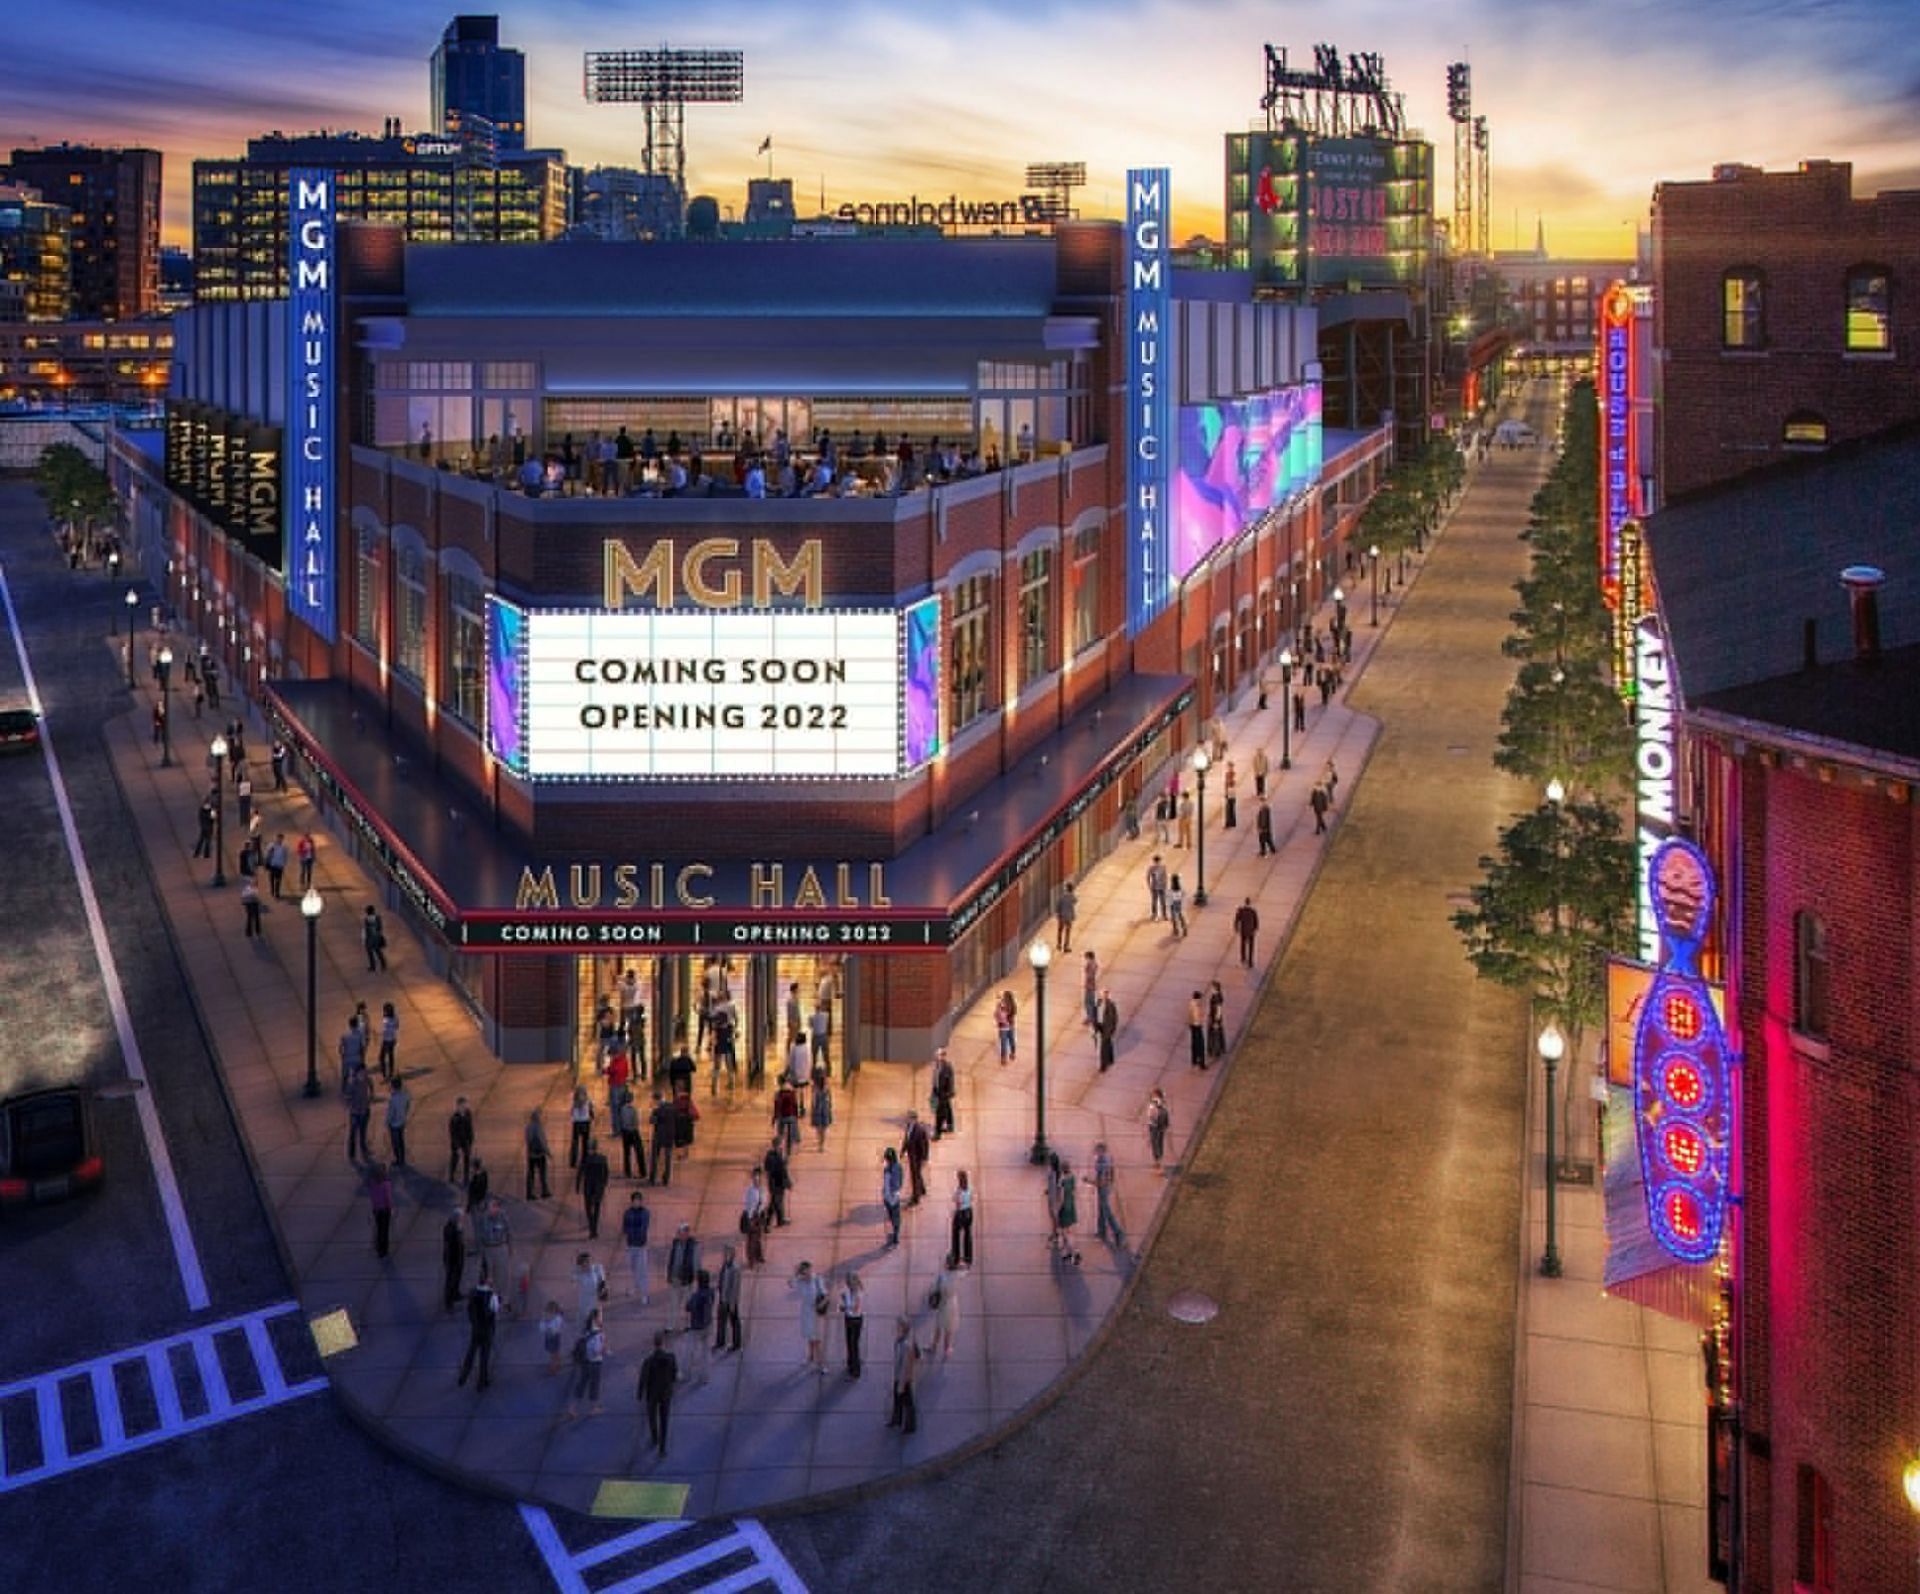 The opening of the MGM Music Hall at Fenway is scheduled for October 3. (Image via @MGMMusicHall)